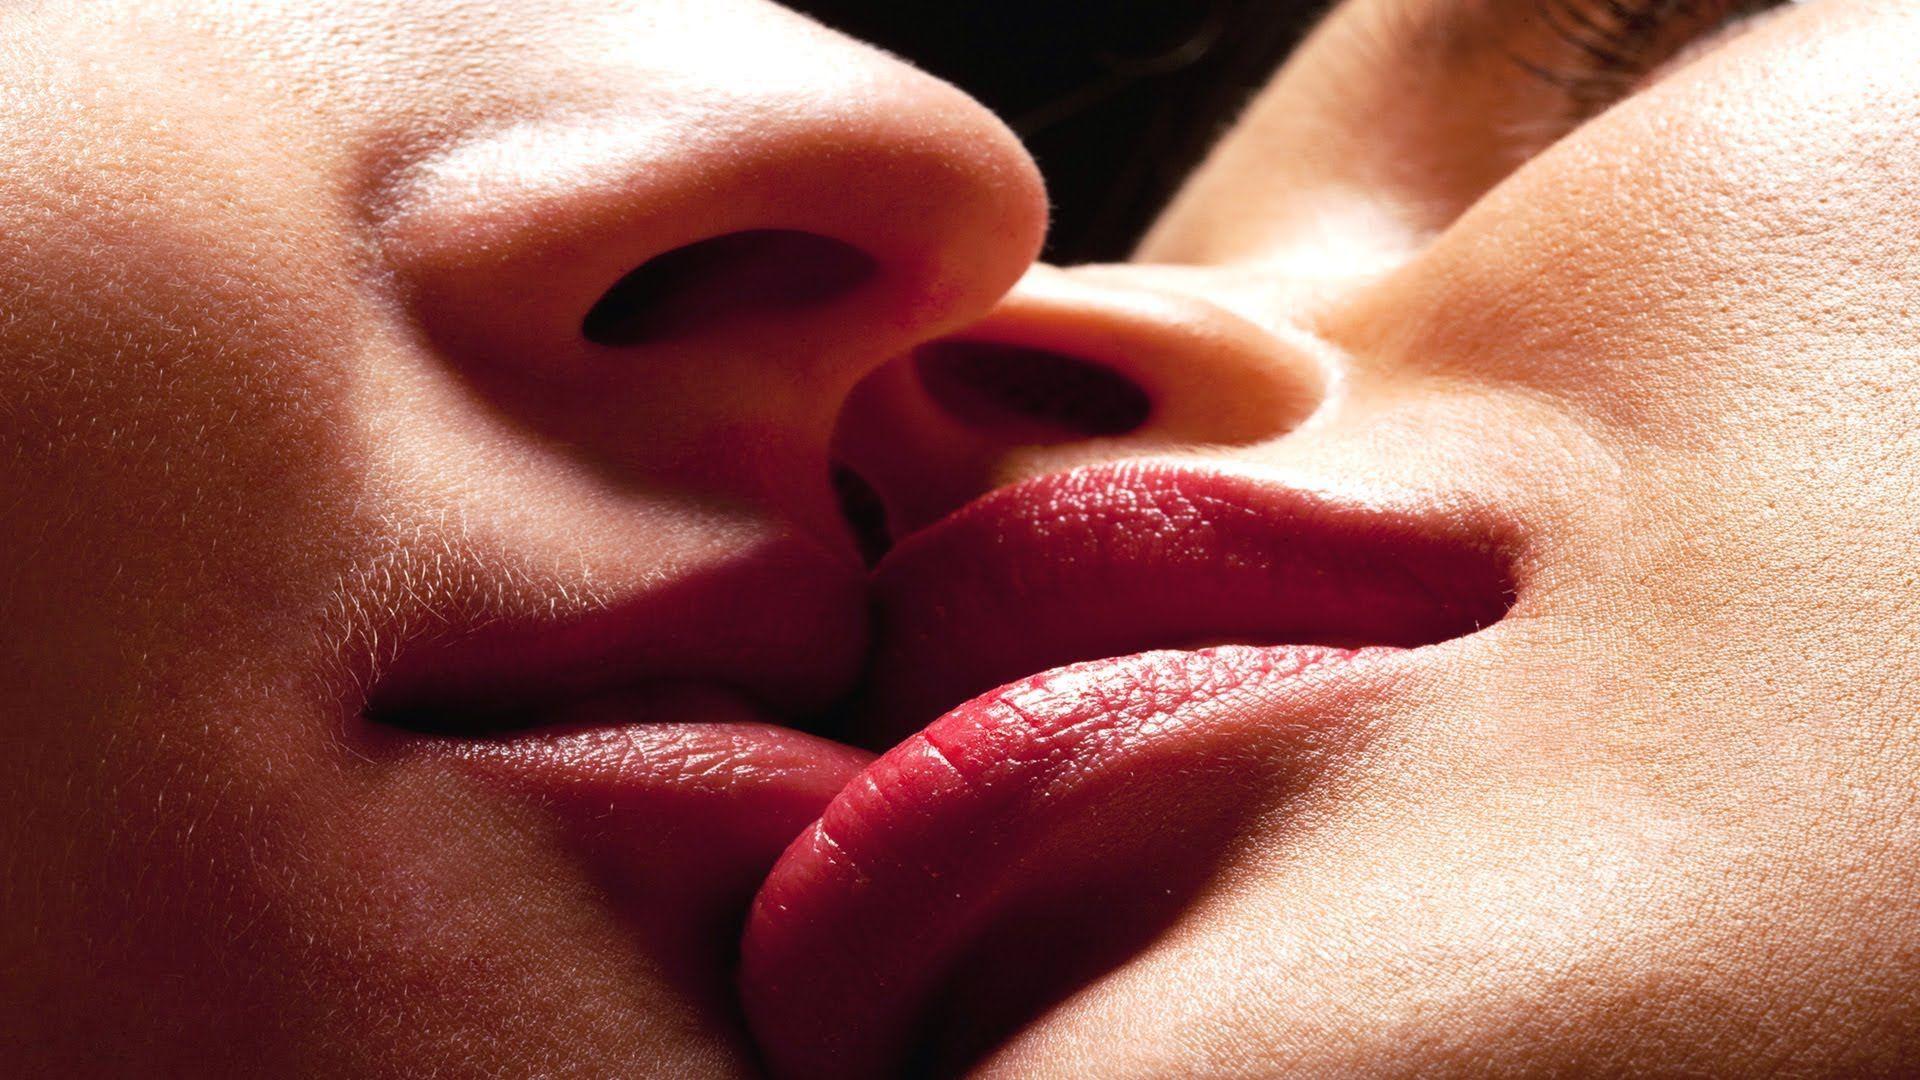 download free hot wallpapers lip kiss pic wallpapers 006.